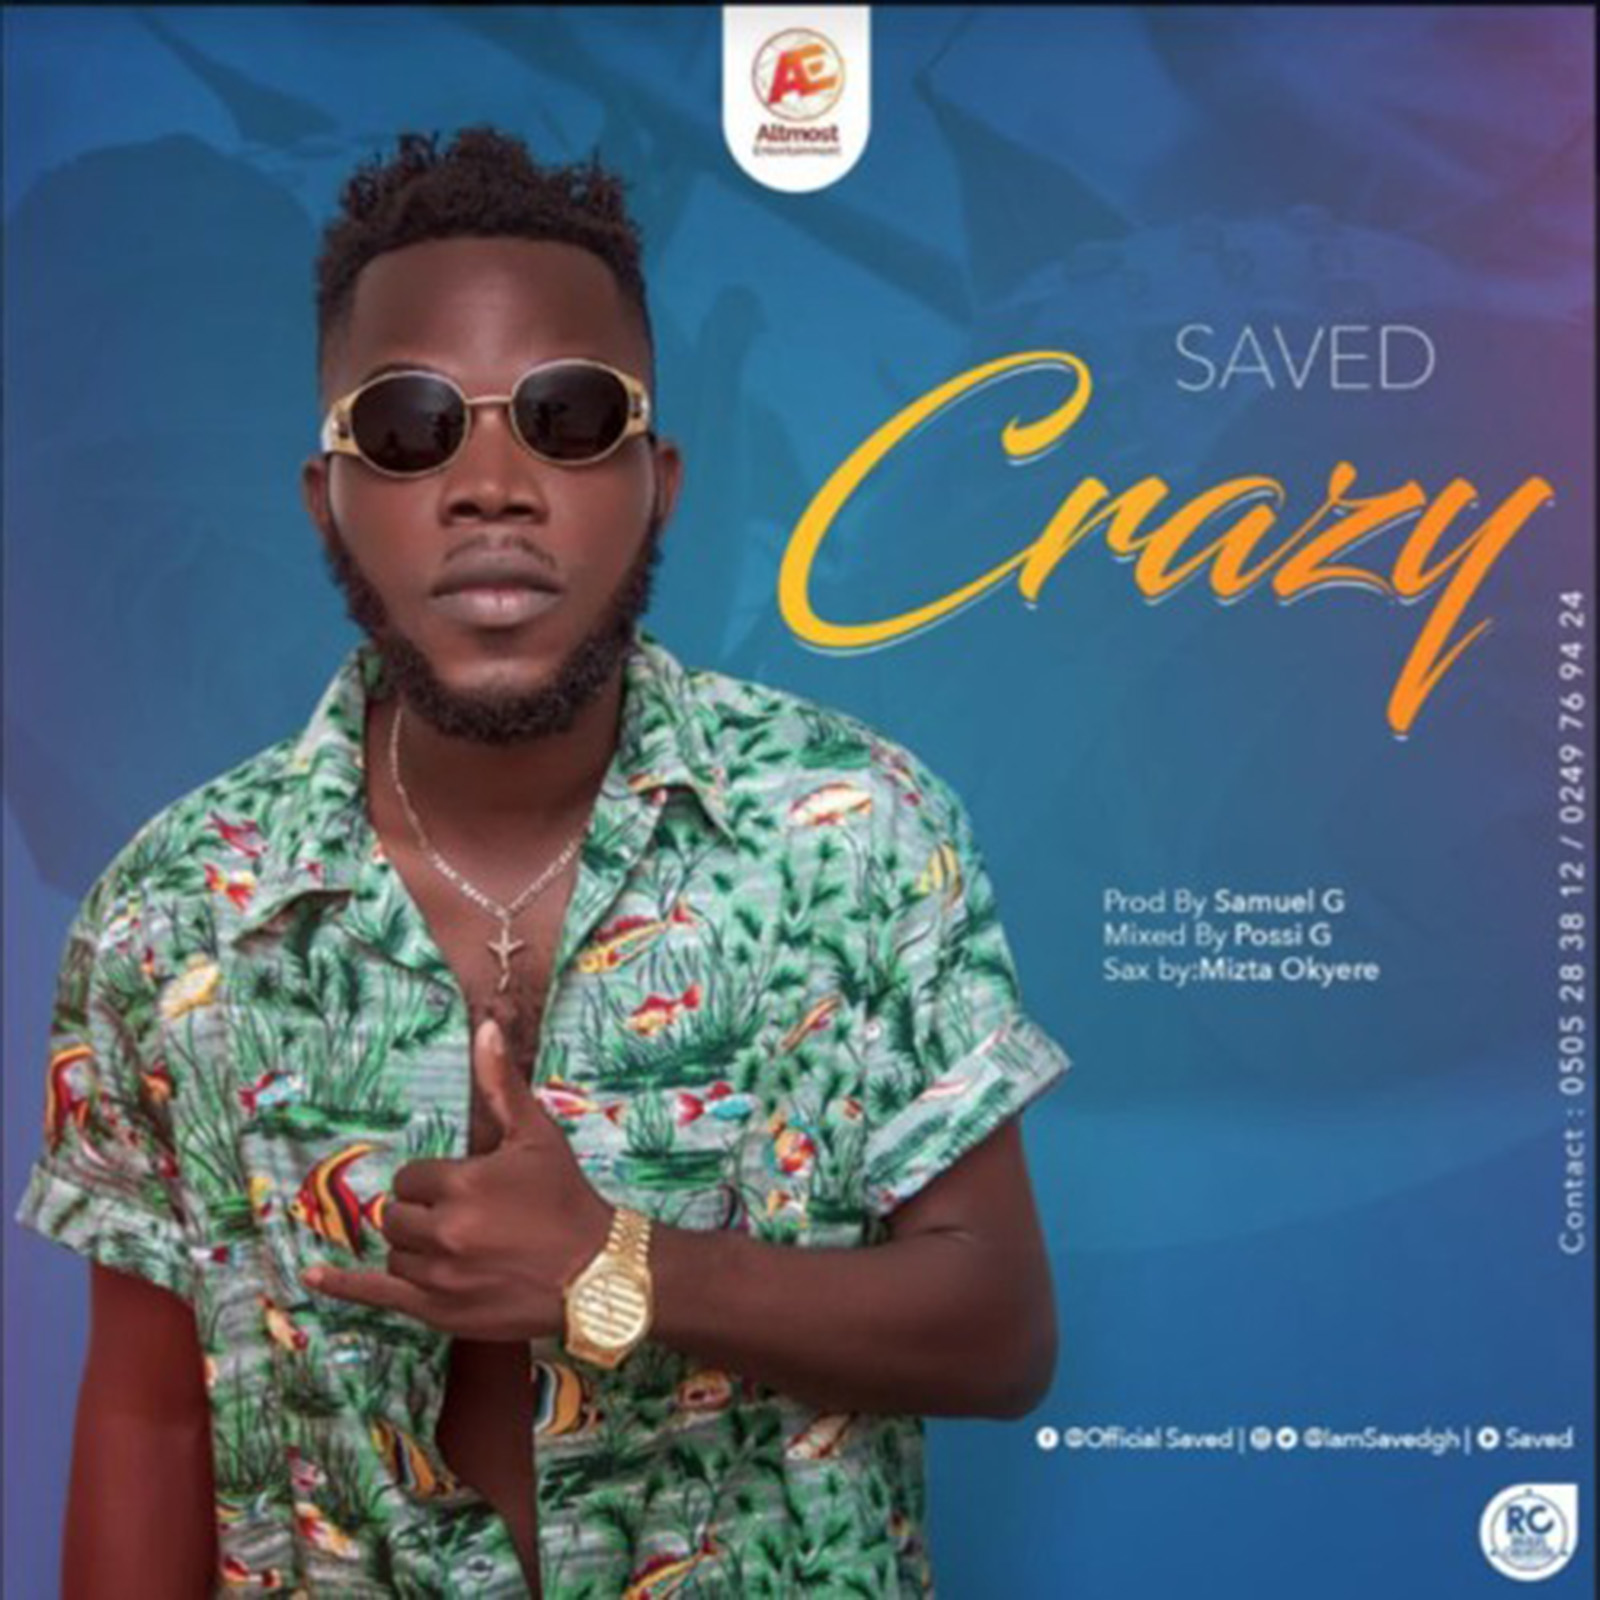 Crazy by Save